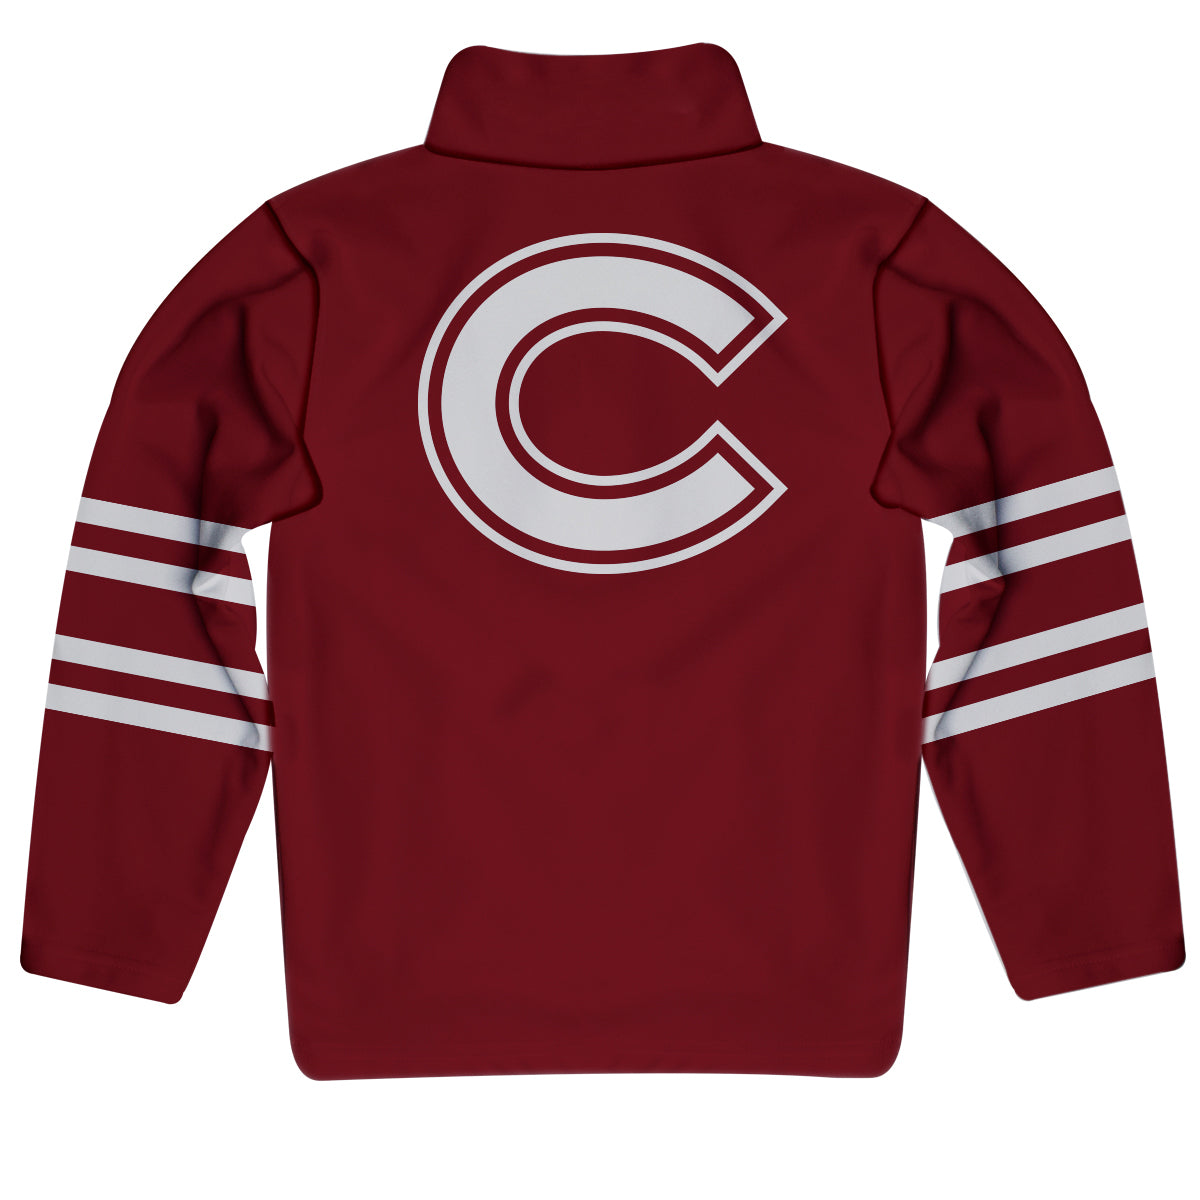 Colgate University Raiders Game Day Maroon Quarter Zip Pullover for Infants Toddlers by Vive La Fete